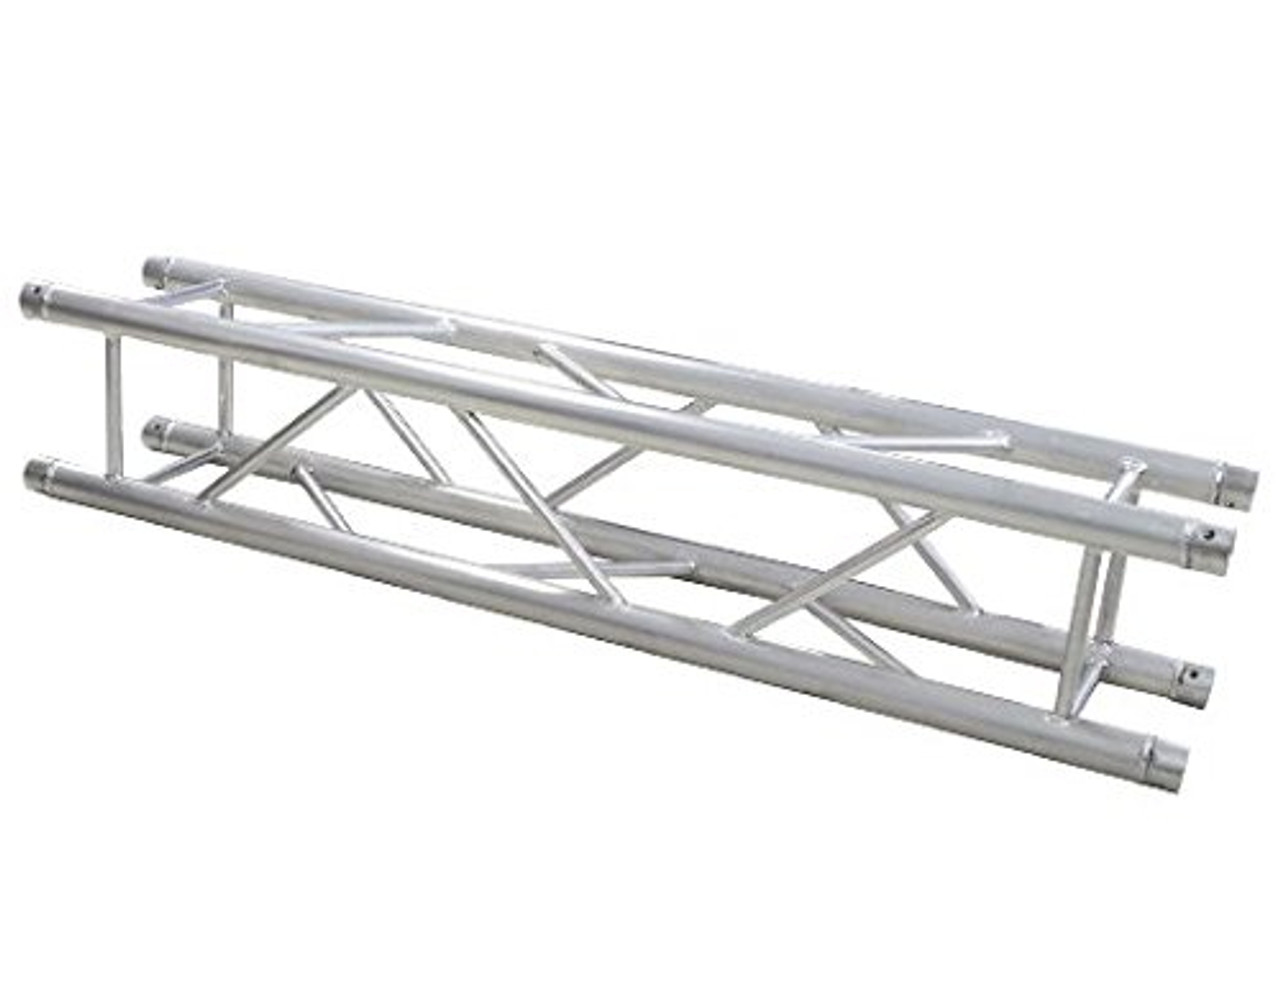 MR TRUSS TSQ492 UNIVERSAL 4.92 FT/1.50 M SQUARE BOX ALUMINUM LIGHTING TRUSSING WITH 2 INCH TUBING FITS MOST TRUSS